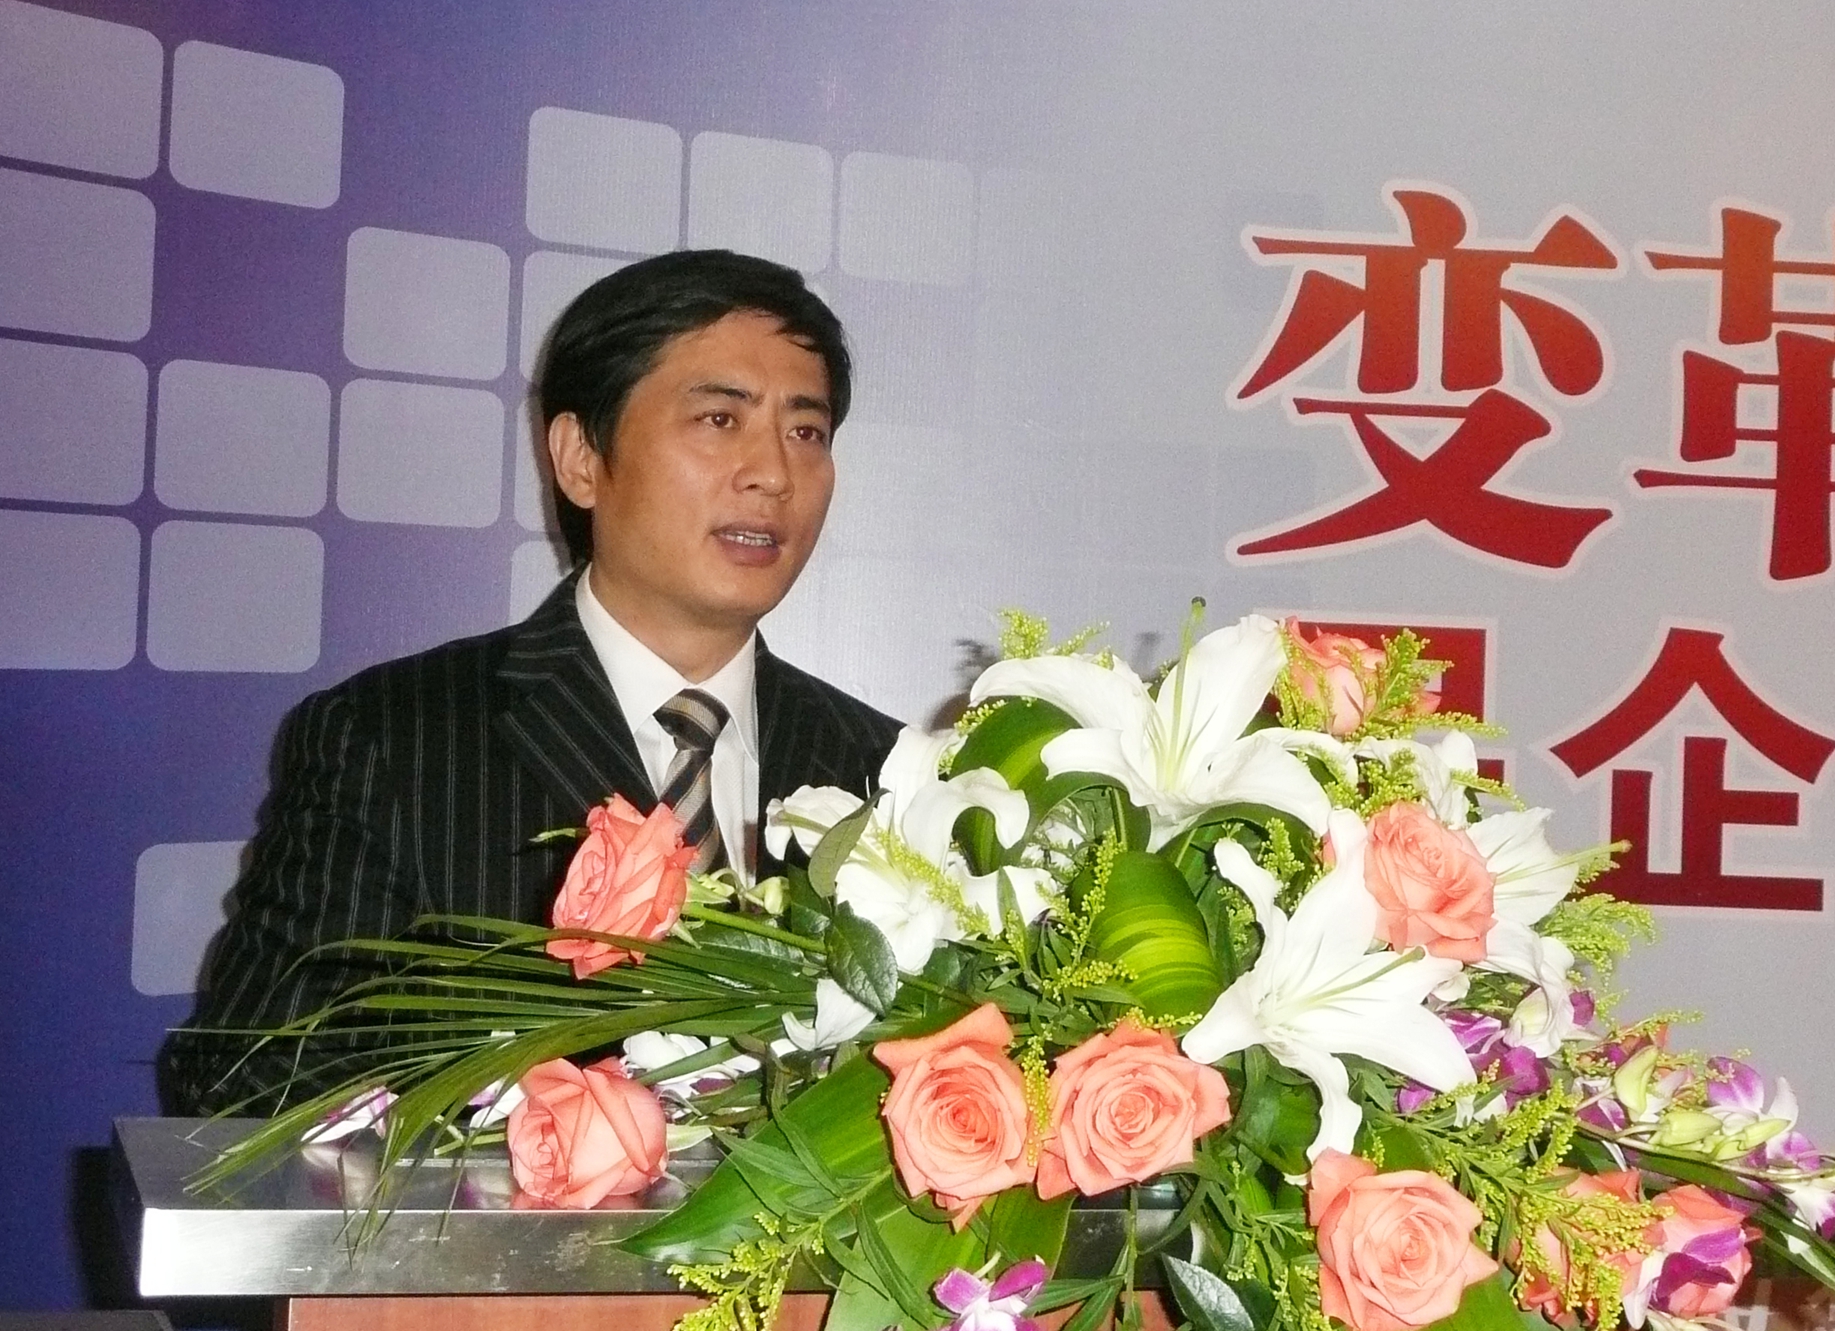 Making a speech about strategy at Qinghua University in 2009